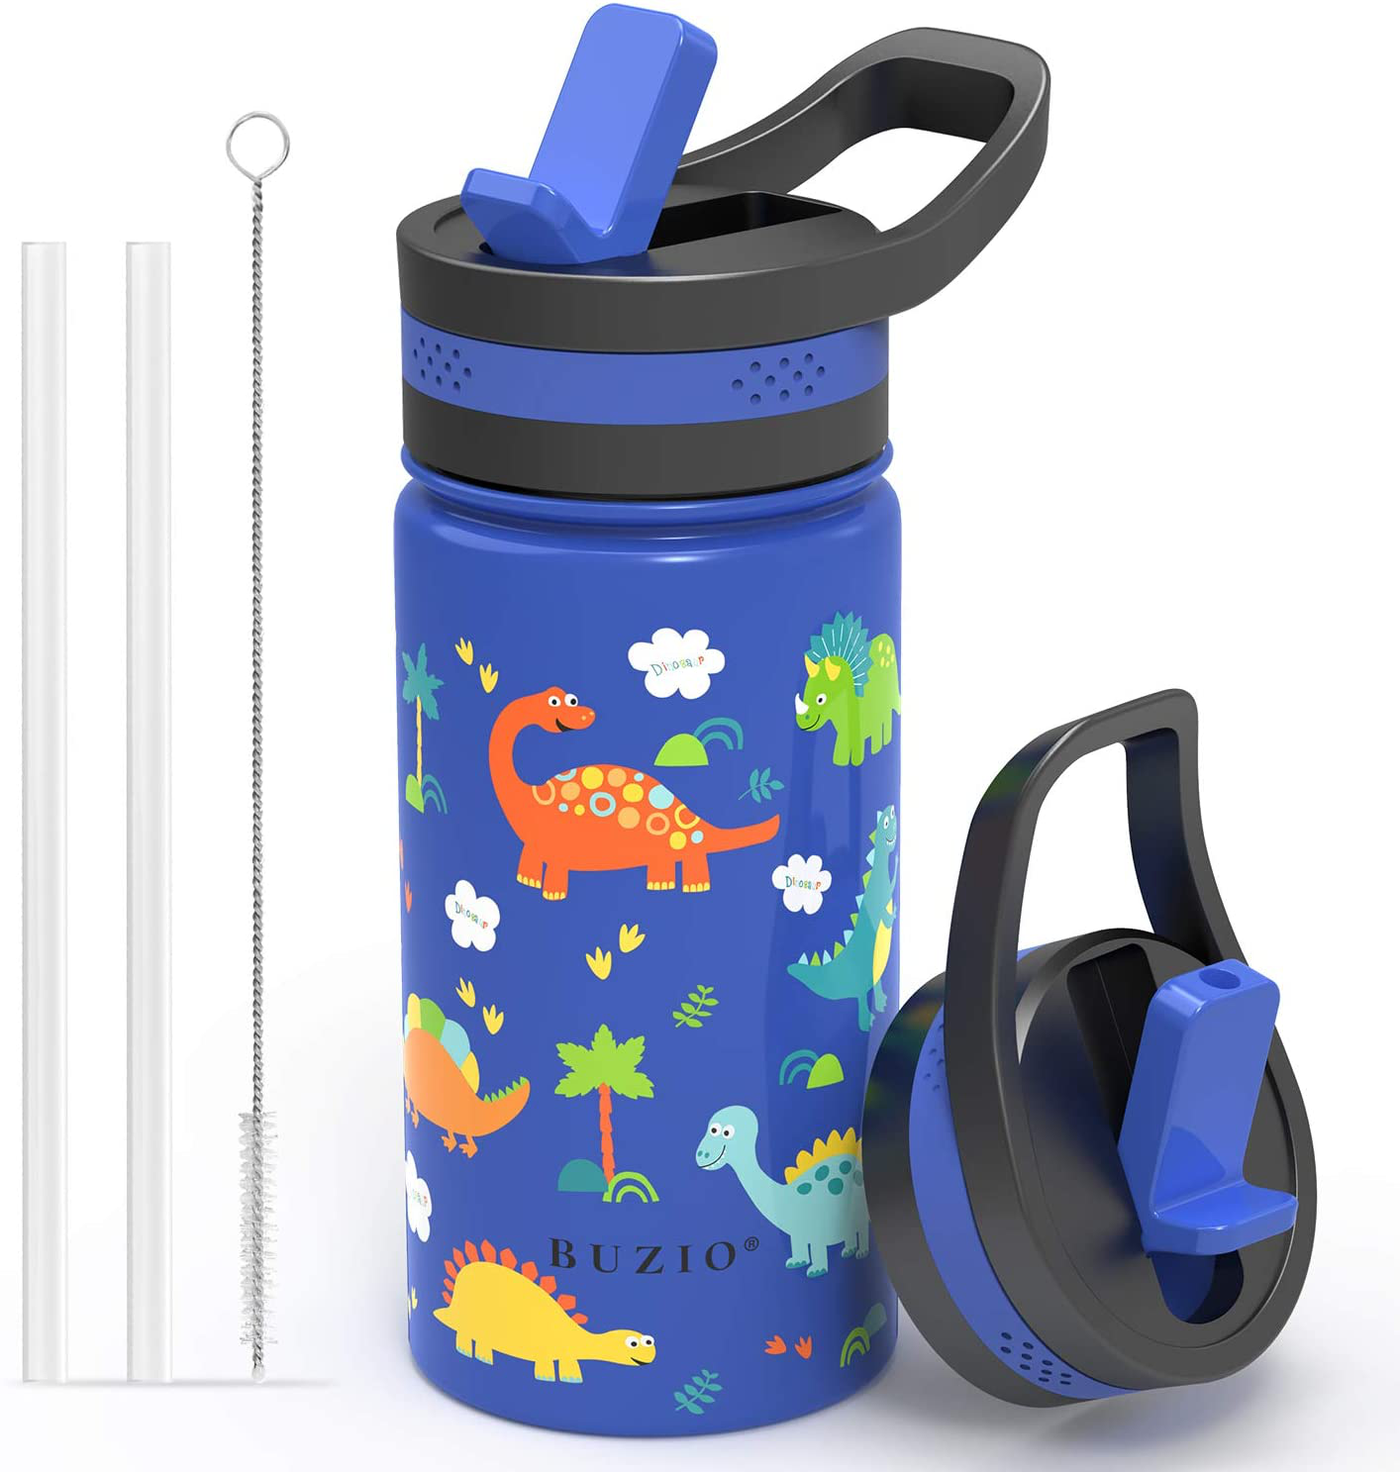 Insulated Water Bottle with Straw Lid, BUZIO Vacuum Double Walled Stainless Steel Wide Mouth Sports Drink Flask Tumbler Travel Cup for Kids, Simple Thermo Canteen Mug Cup with Blue Shark